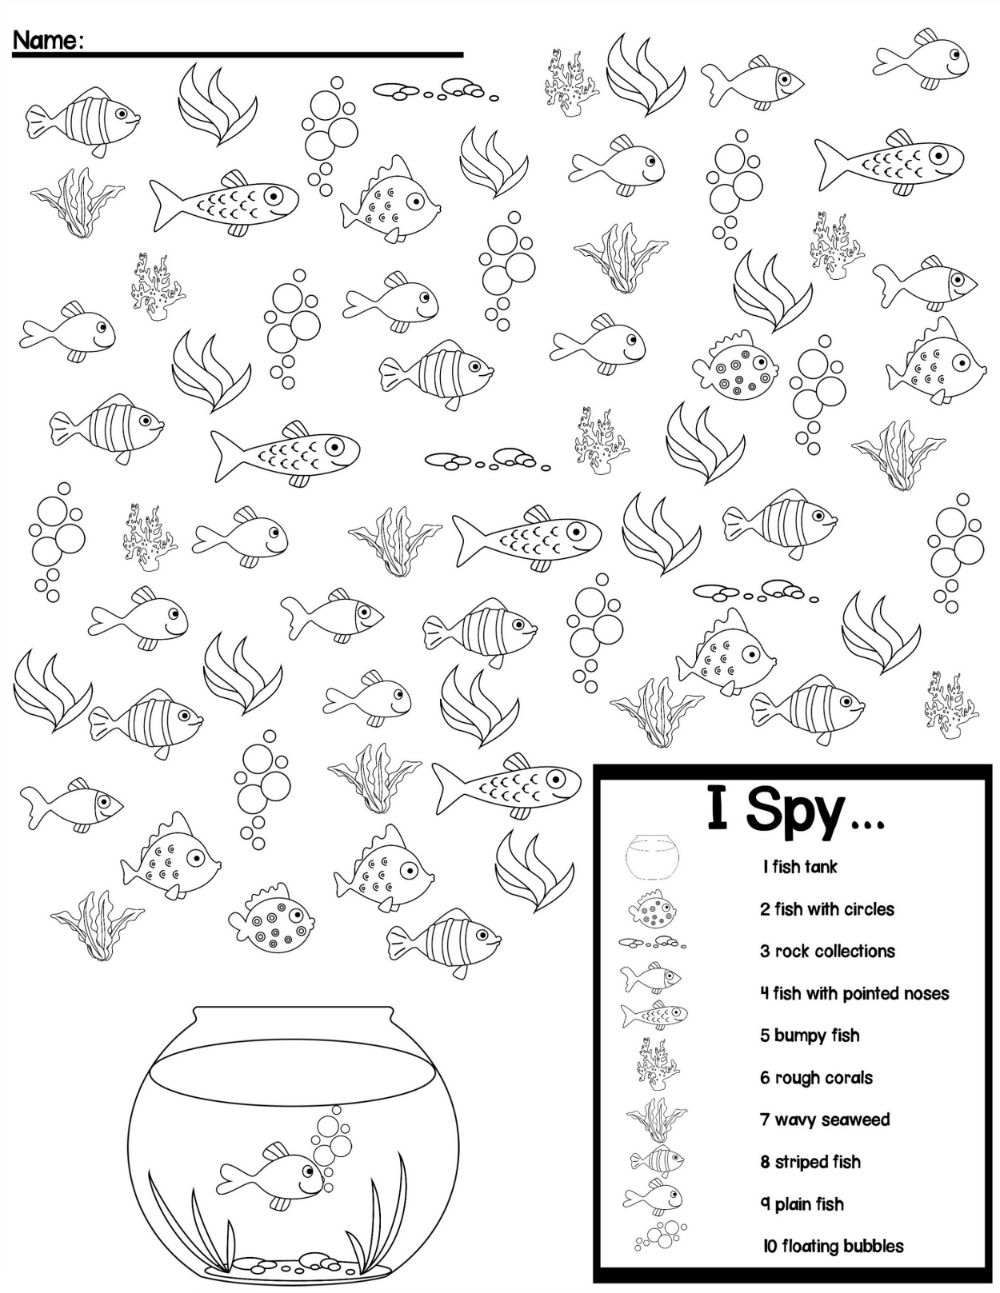 Free Printable Summer Activity Sheets For Kids | K5 Worksheets with regard to Free Printable Activity Sheets For Kids